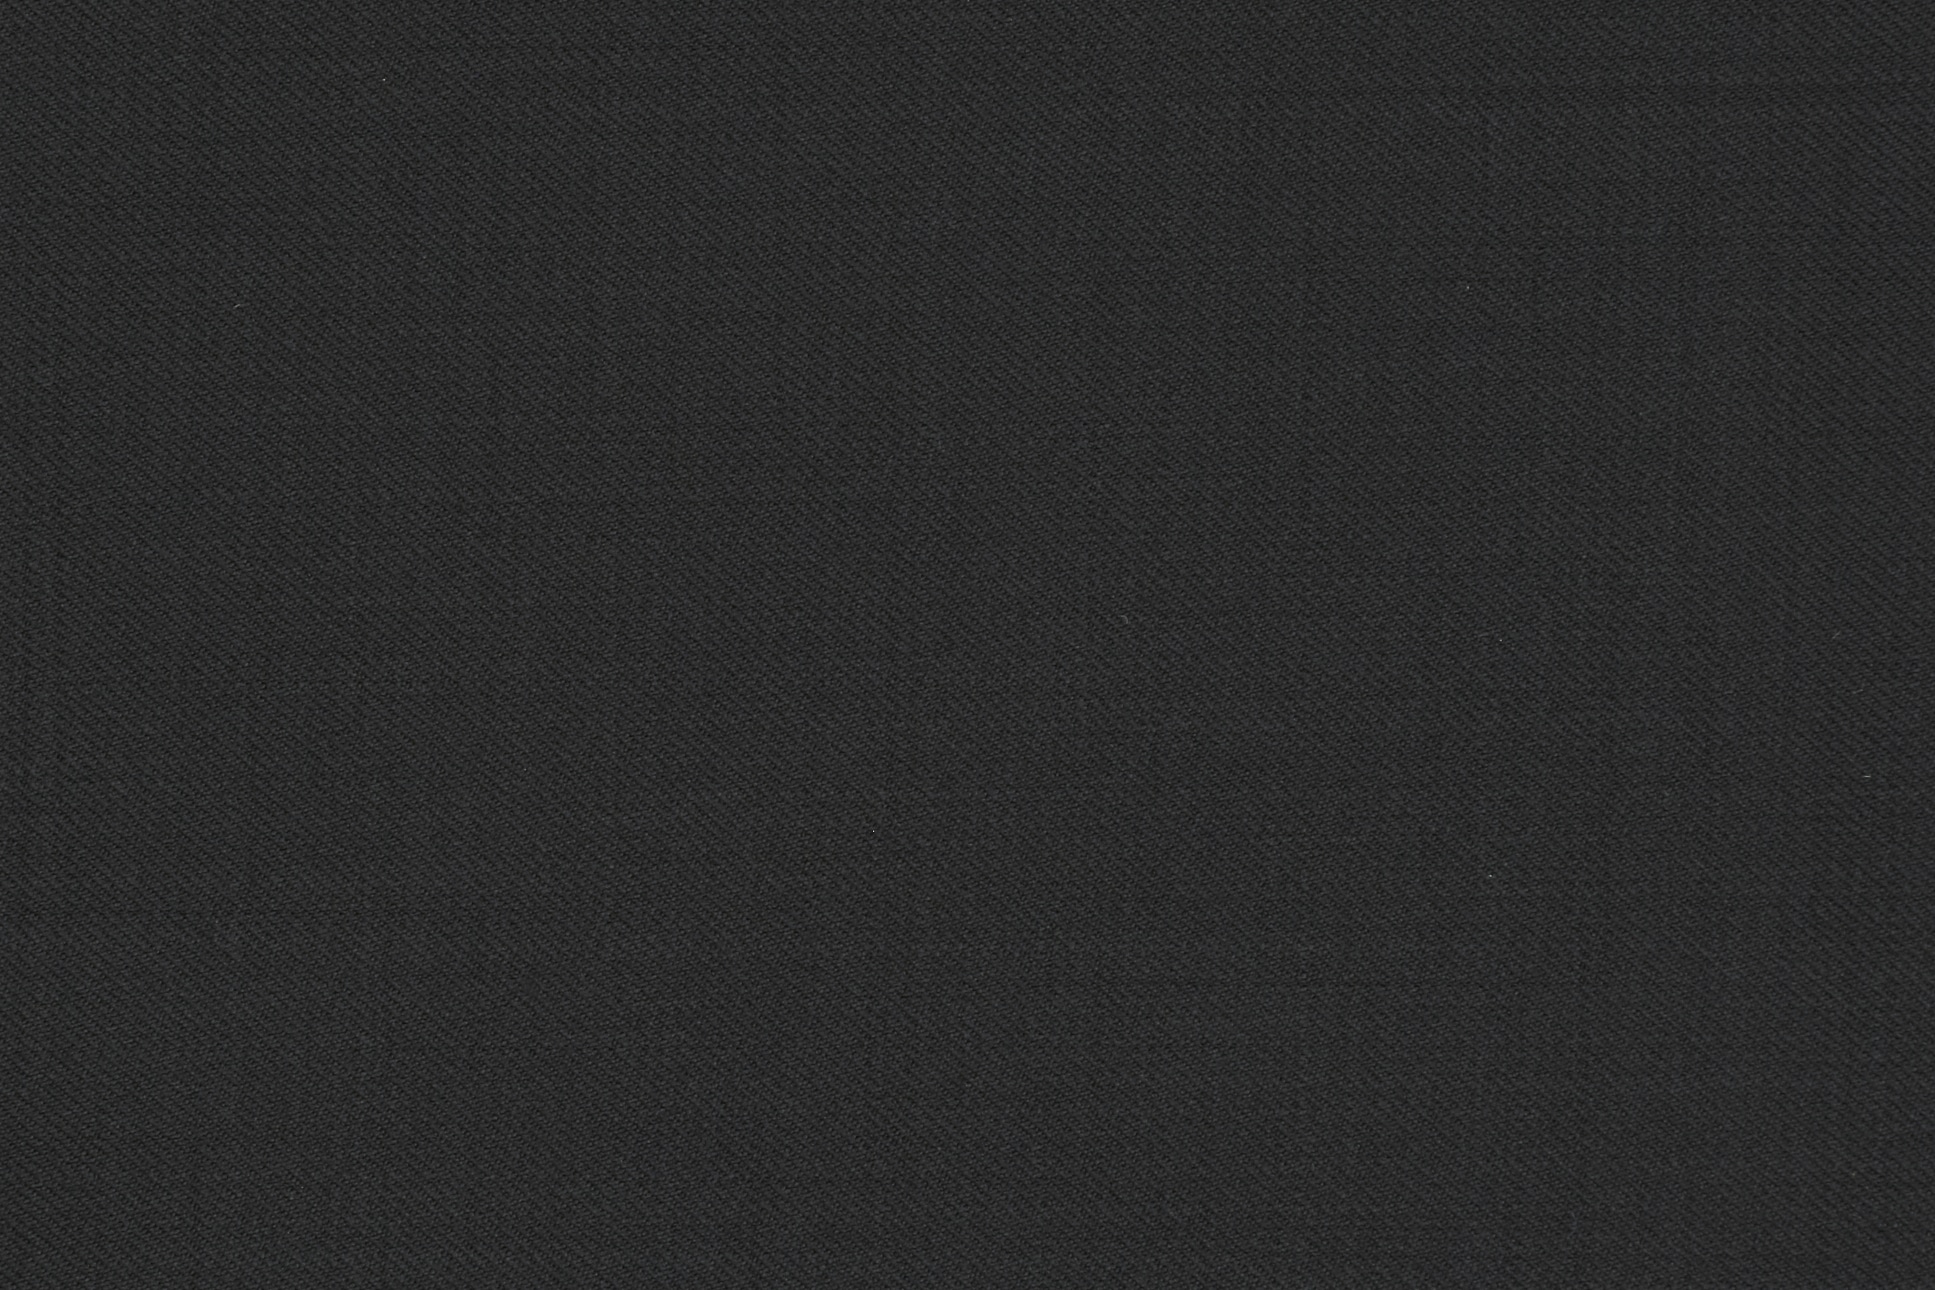 Mondo Fabric for Suits - OP 1825 Midnight Black